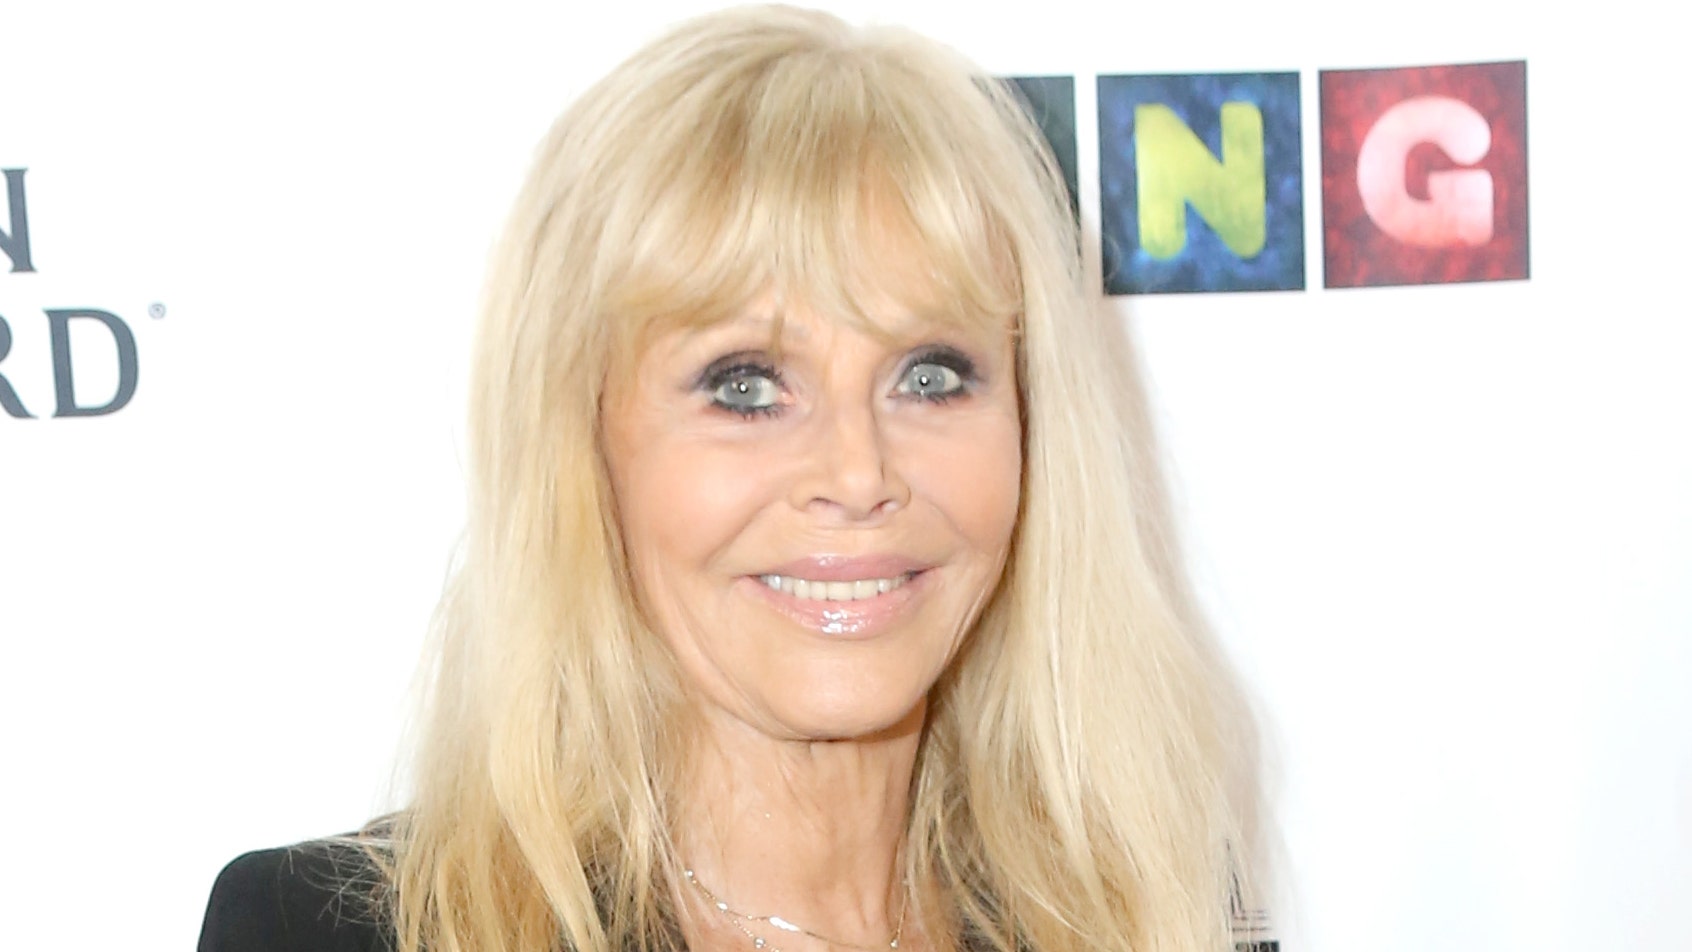 Former Bond girl Britt Ekland says she ‘ruined her face’ with painful lip fillers